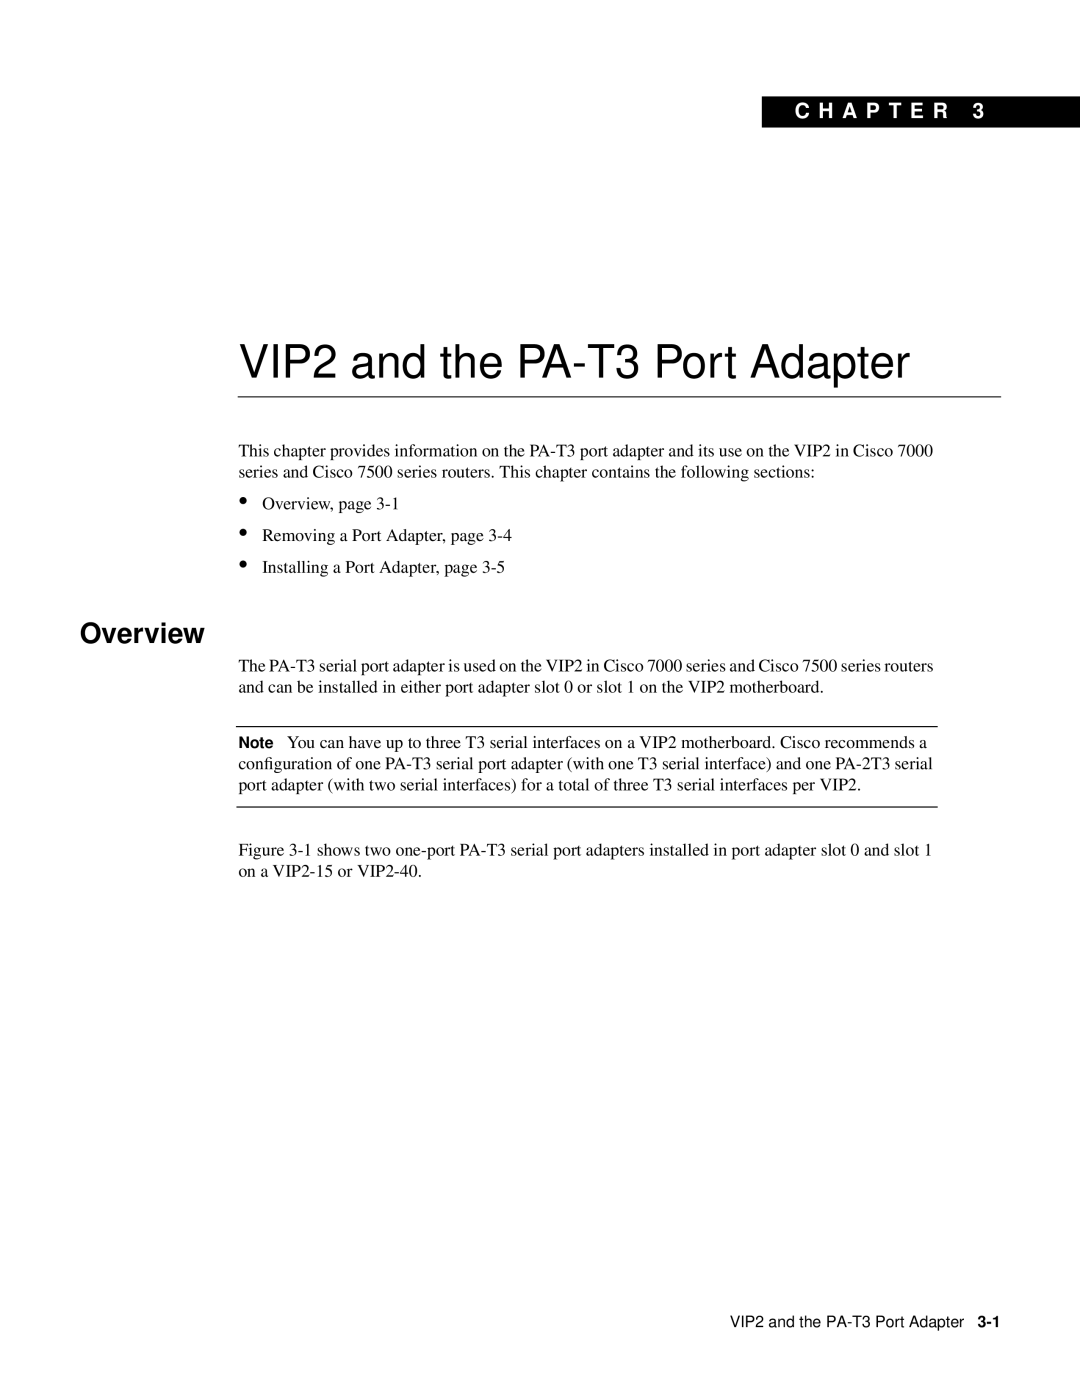 Cisco Systems manual VIP2 and the PA-T3 Port Adapter, Overview, C H A P T E R 